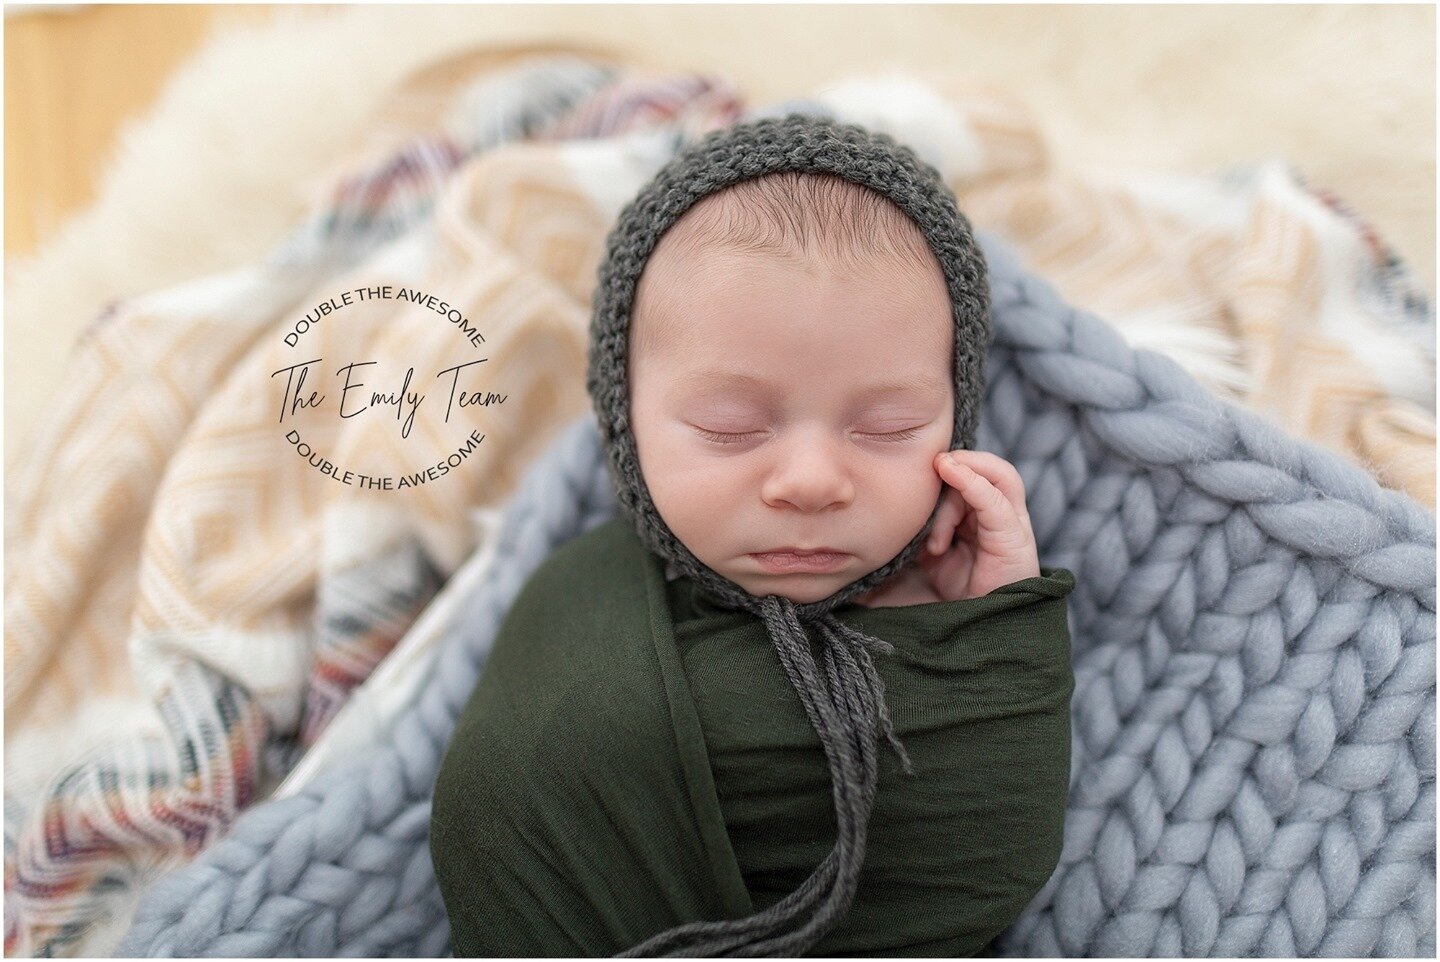 Got to meet this tiny friend this past weekend! &lt;3⁠
⁠
#reallife #reallove #newbornphotography #newborn #newbornphotographer #babyphotography #baby #newbornbaby #photography #babyboy #fresh #familyphotography #babyphotographer #newbornsession #newb